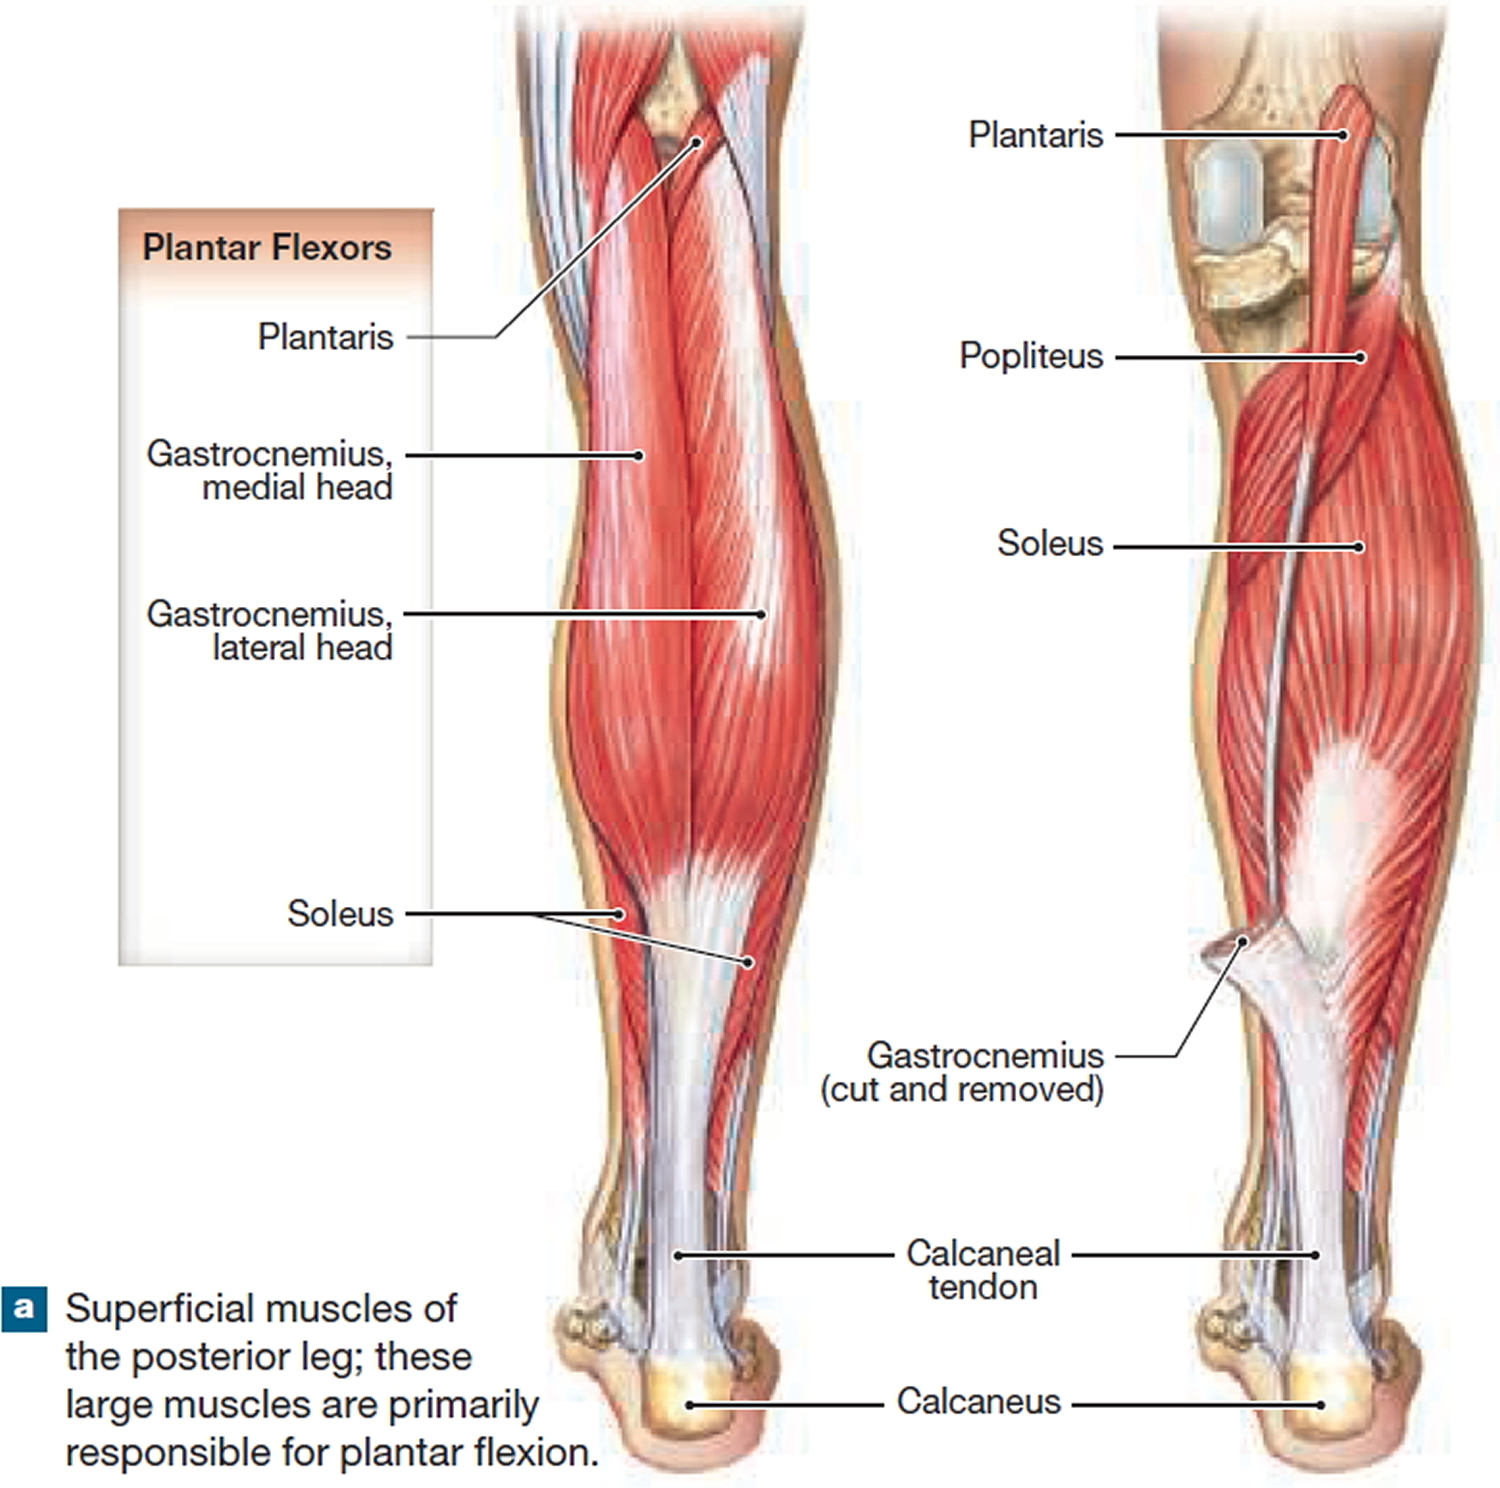 muscles that move the leg and foot - superficial muscles